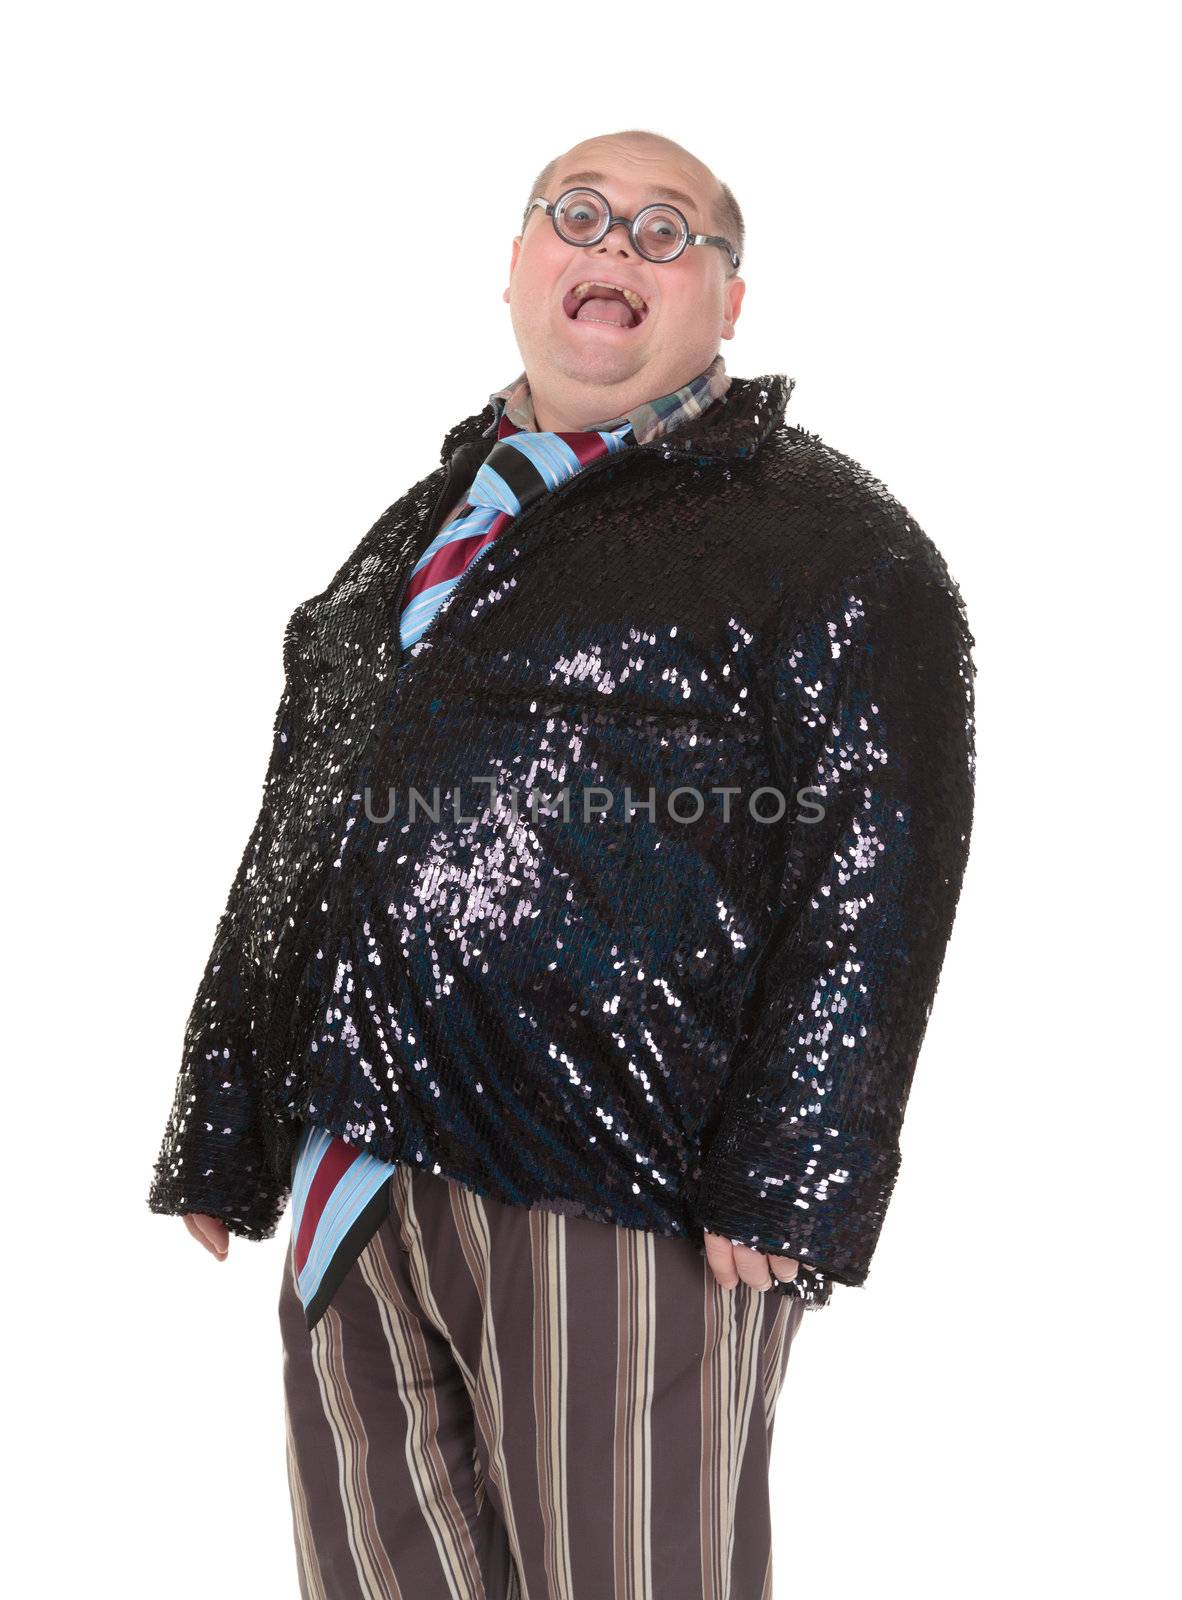 Fun portrait of an obese man with an outrageous fashion sense wearing a mixture of stripes, checks and spangles topped by an oversized flamboyant tie, on white